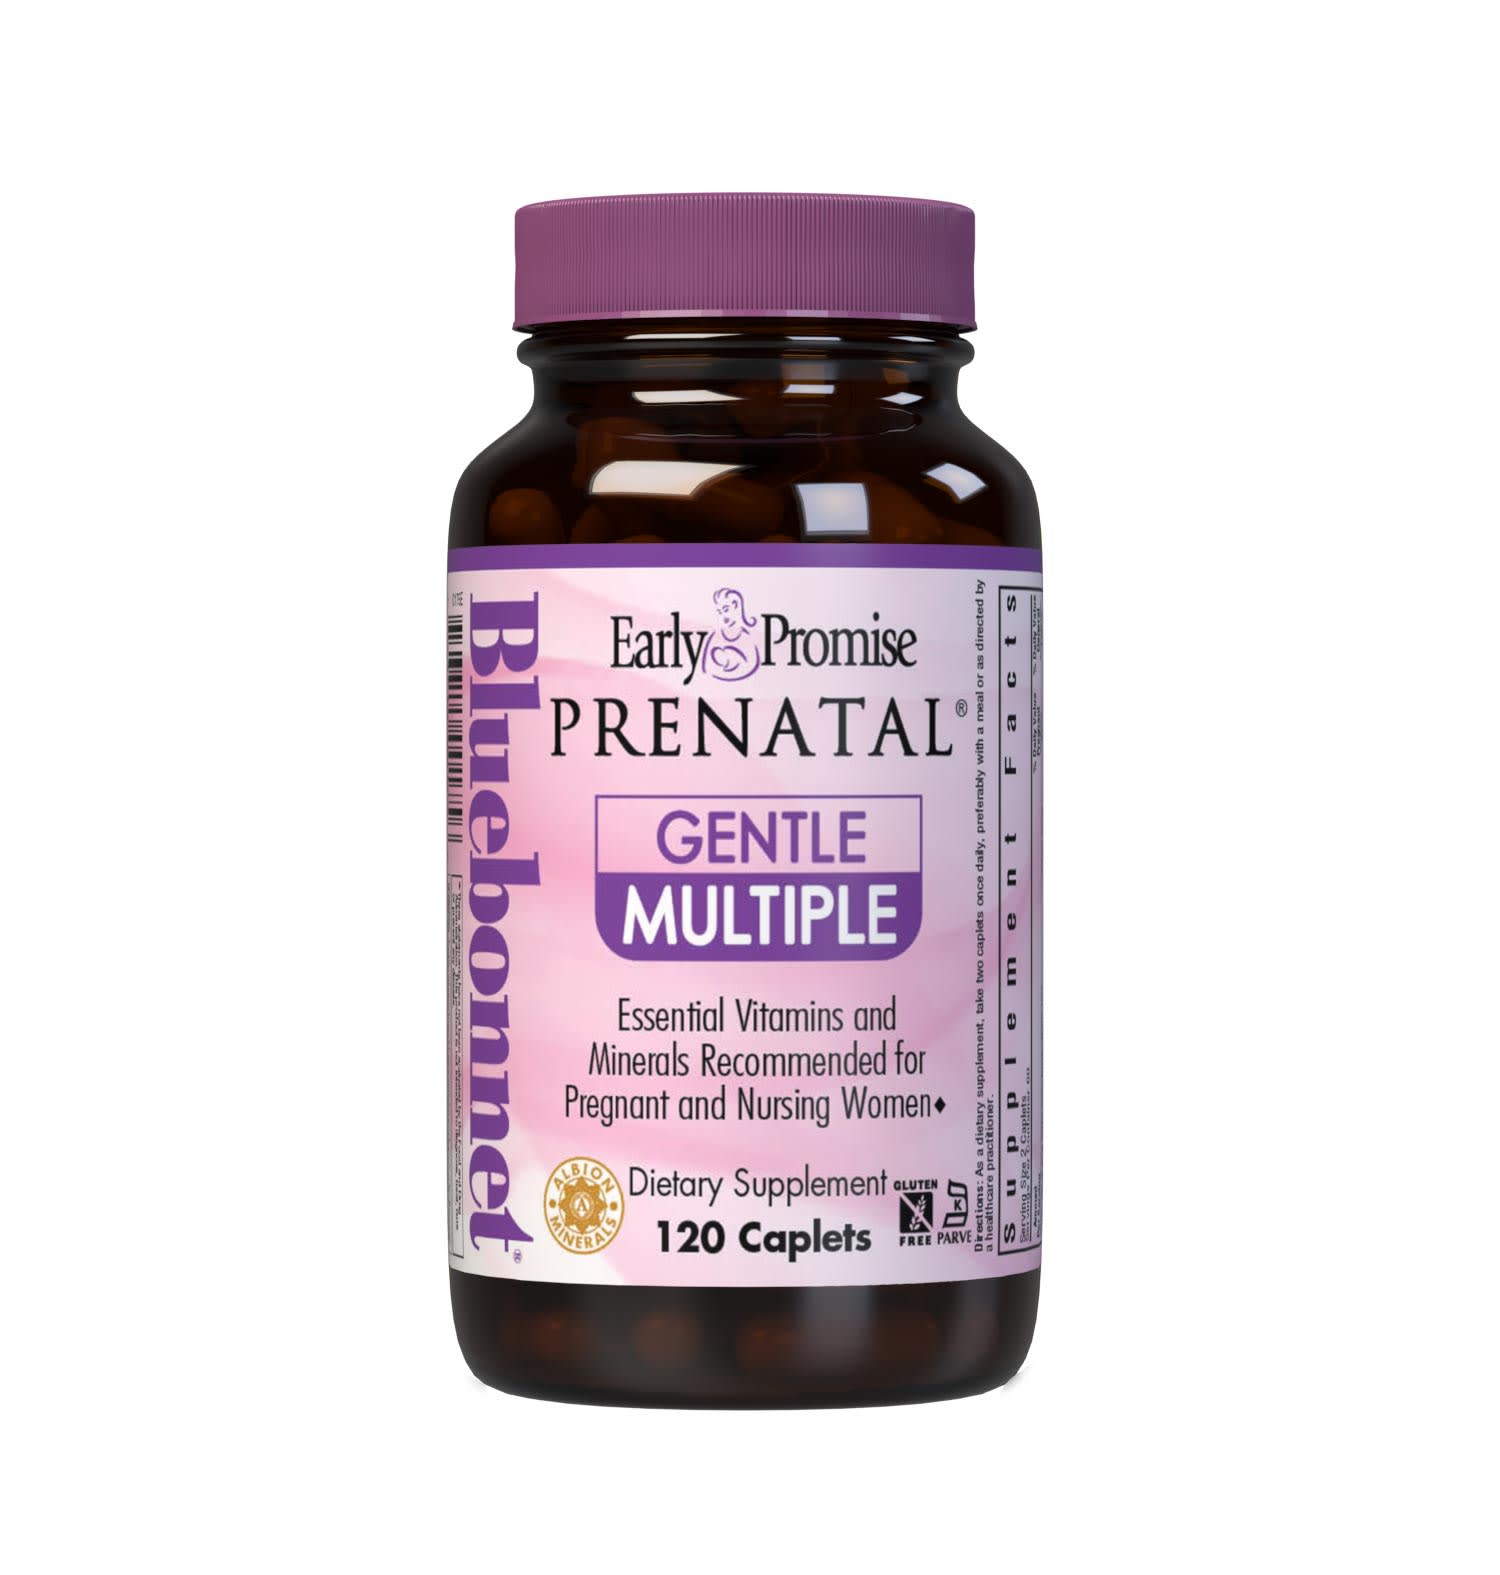 Early Promise Prenatal Gentle Multiple 120 Caplets are formulated with responsible levels of nutrients based on what the scientific community has agreed as optimum for pregnant and nursing women. This gentle, scientific formula are formulated with at least 100% of all the essential vitamins for pregnant/lactating women from sources known to be gentle on mom’s sensitive GI as well as providing nearly 100% of all the essential macro- and microminerals. #size_120 count